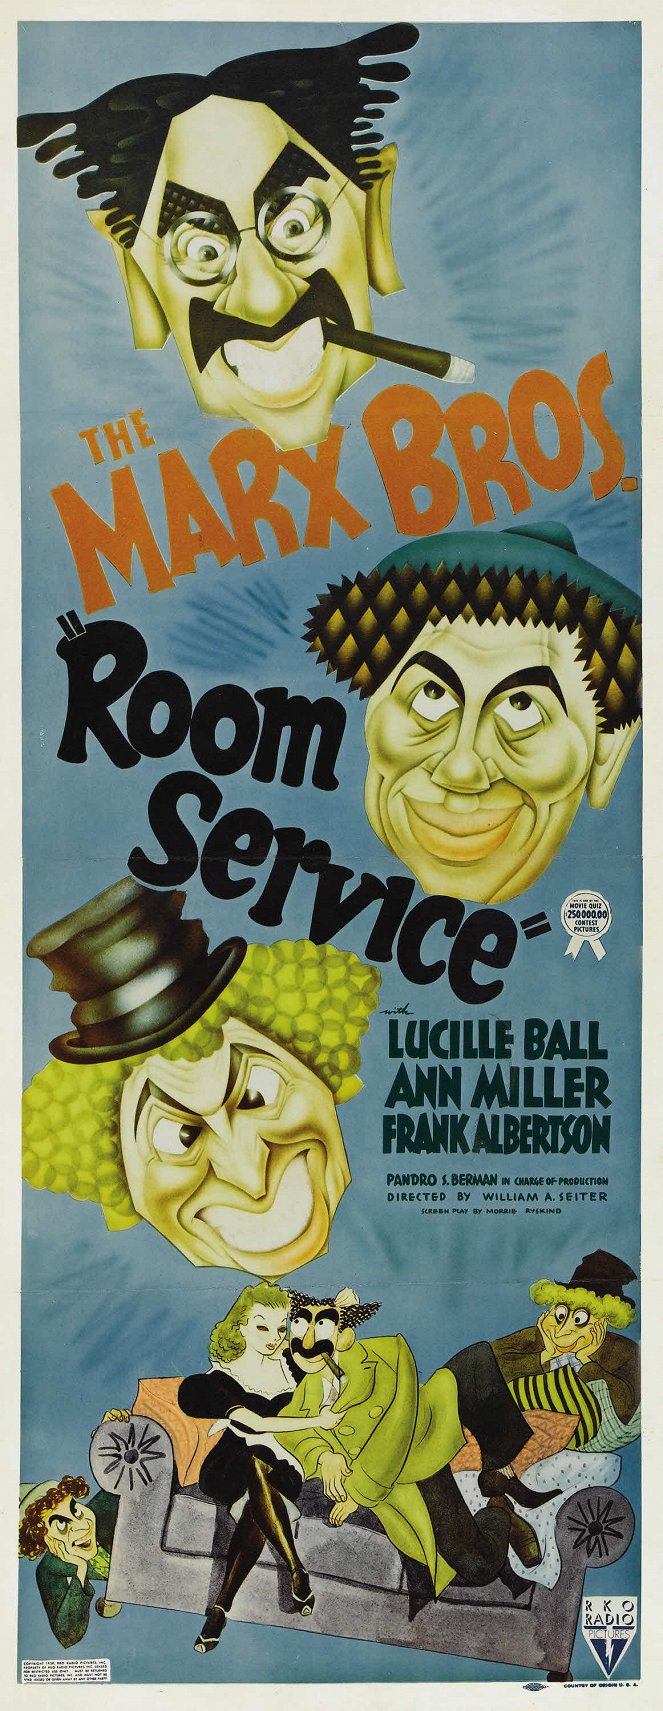 Room Service - Posters